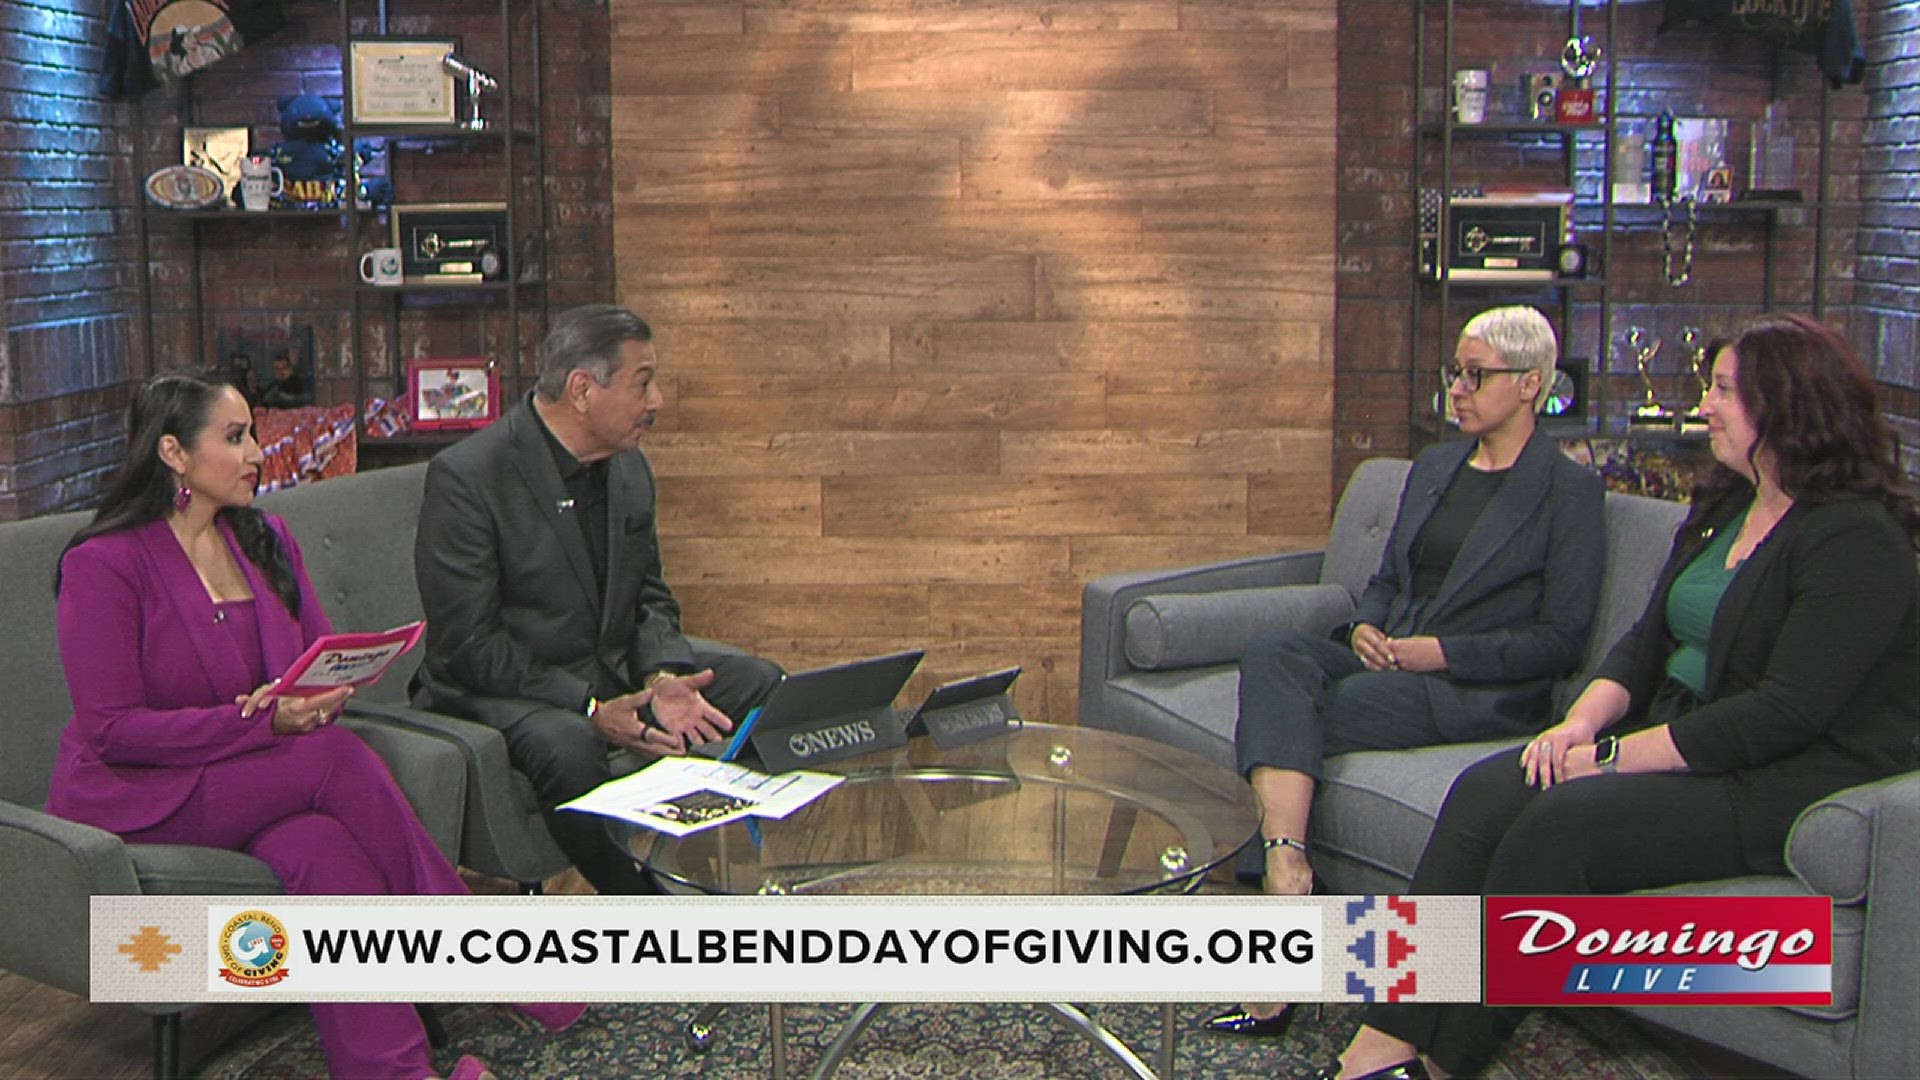 Cenikor Foundation's Crystal Aguilar joined us on Domingo Live to share how this year's fundraiser will help provide sober living resources and housing.